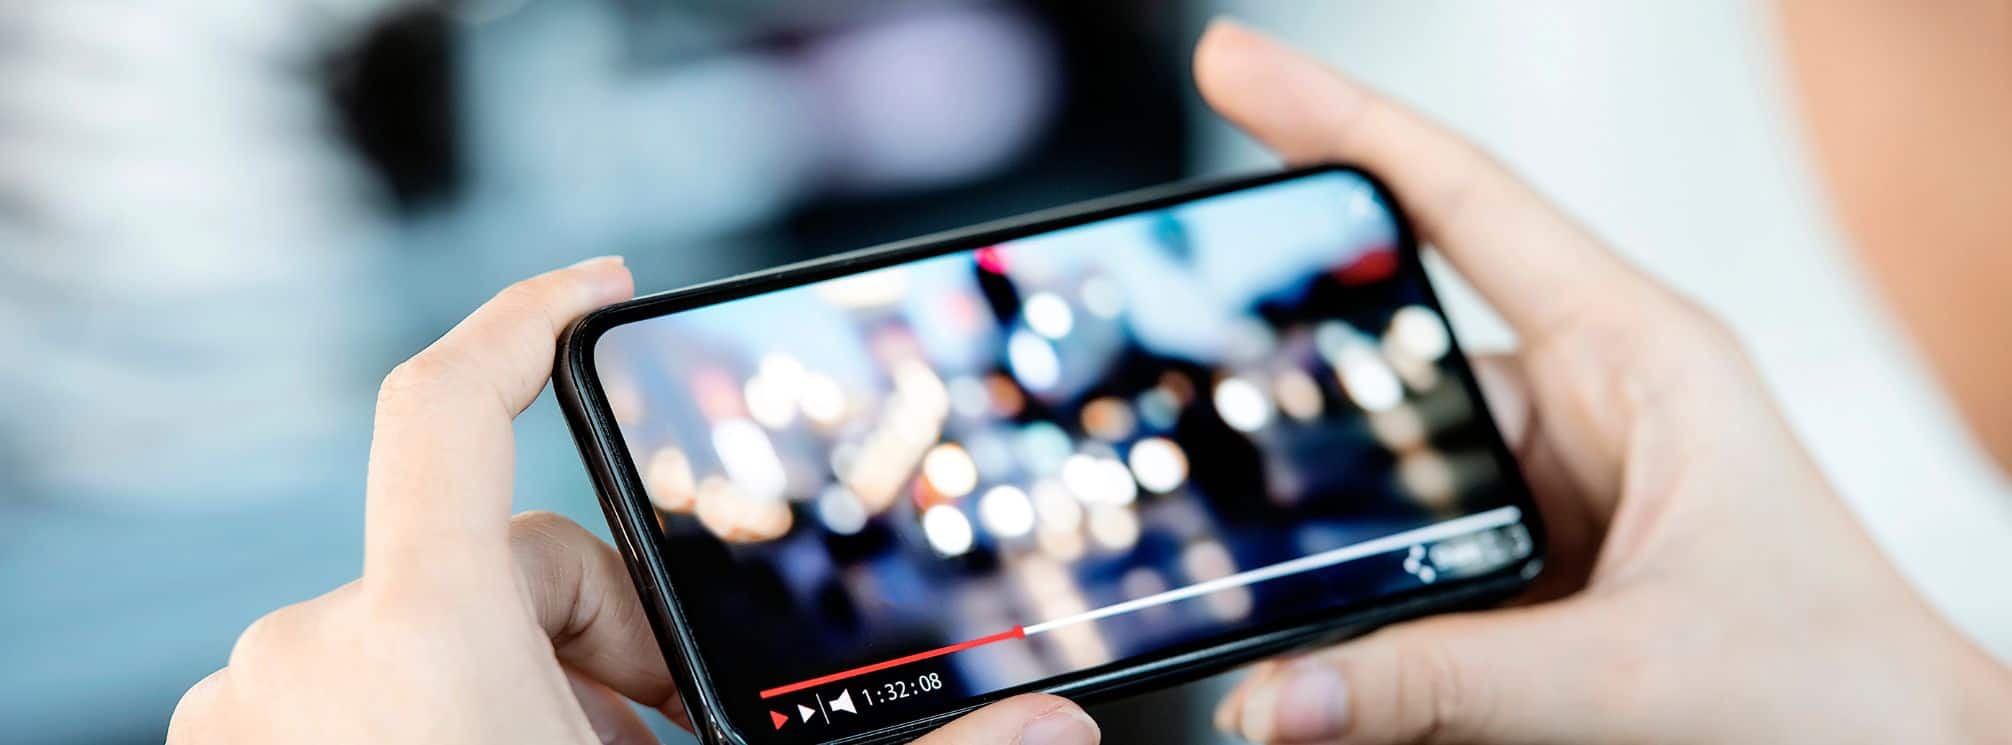 hands holding a smartphone with a video playing on it